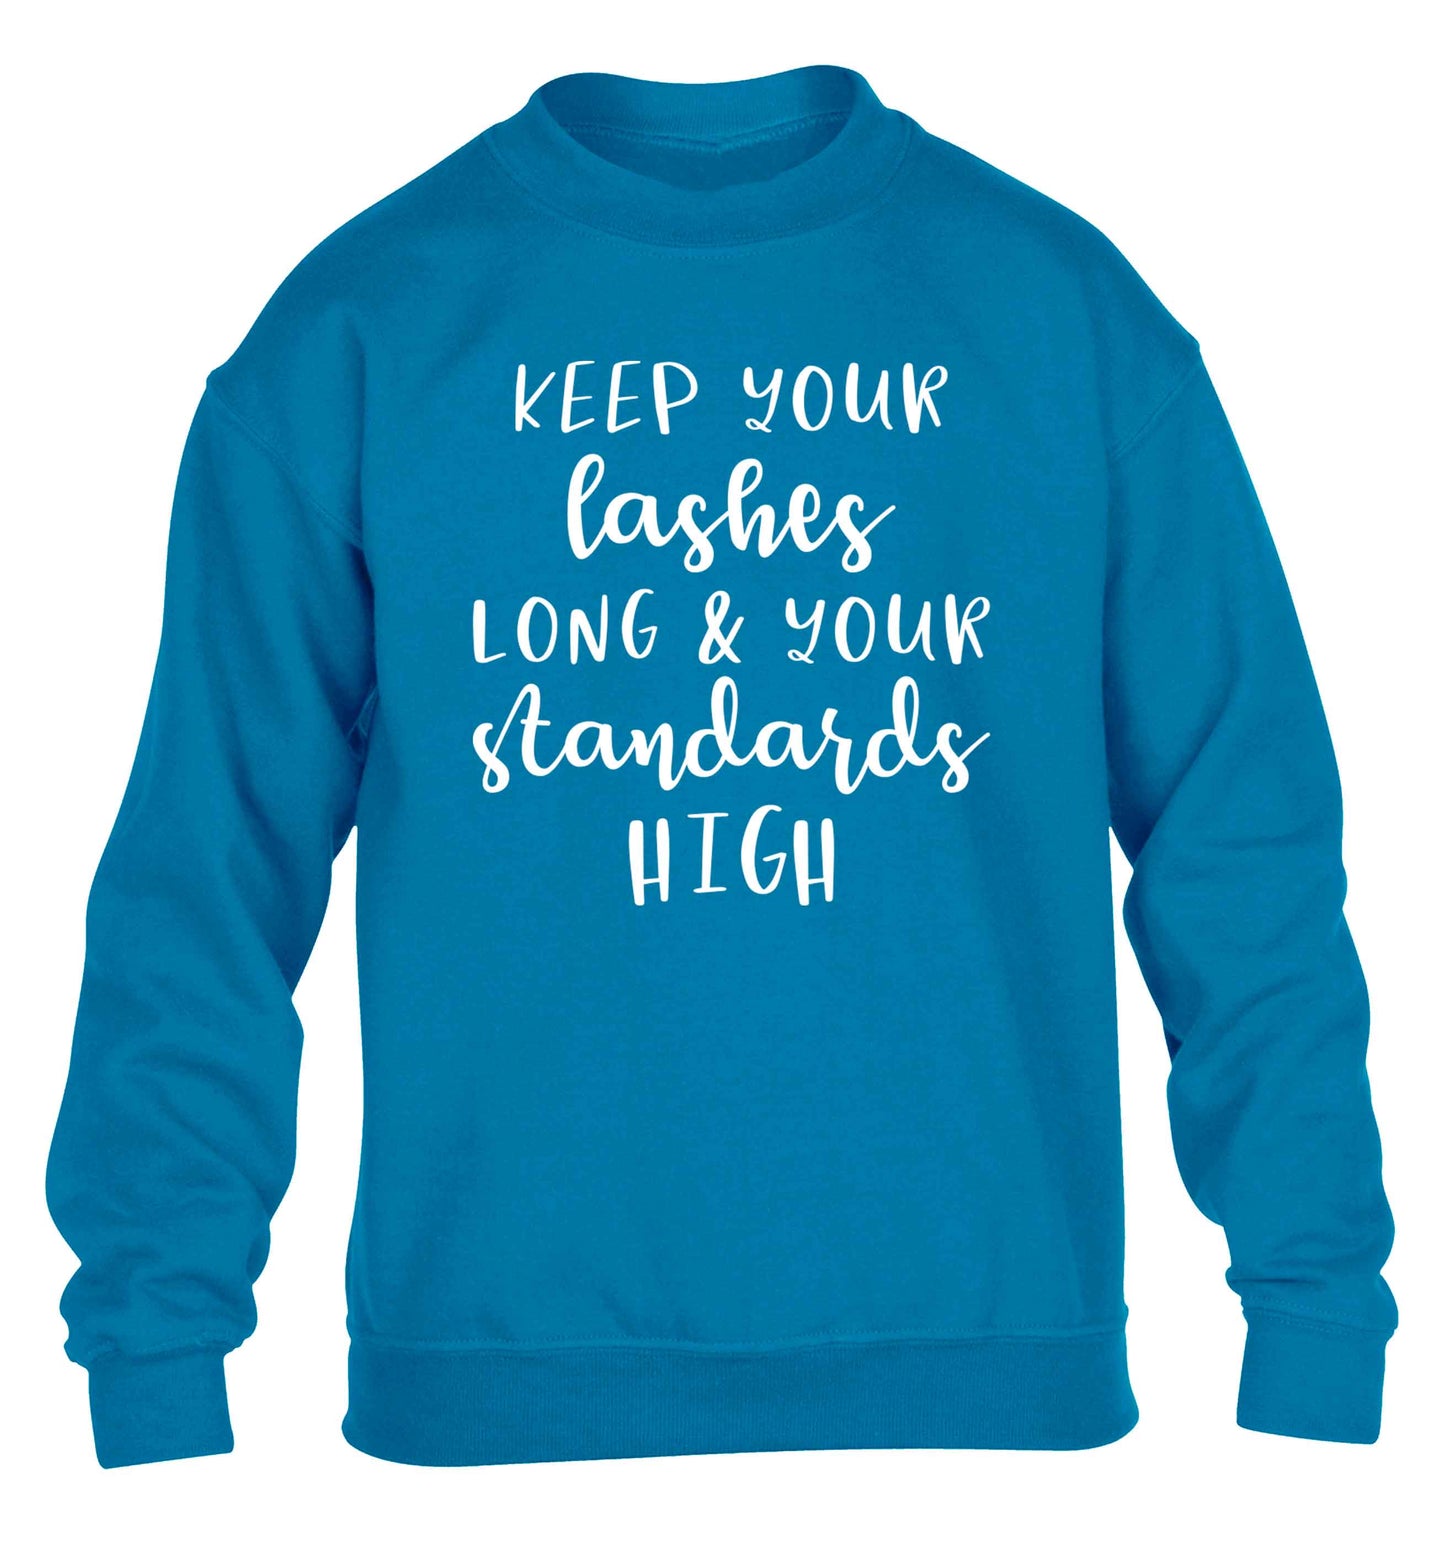 Keep your lashes long and your standards high children's blue sweater 12-13 Years